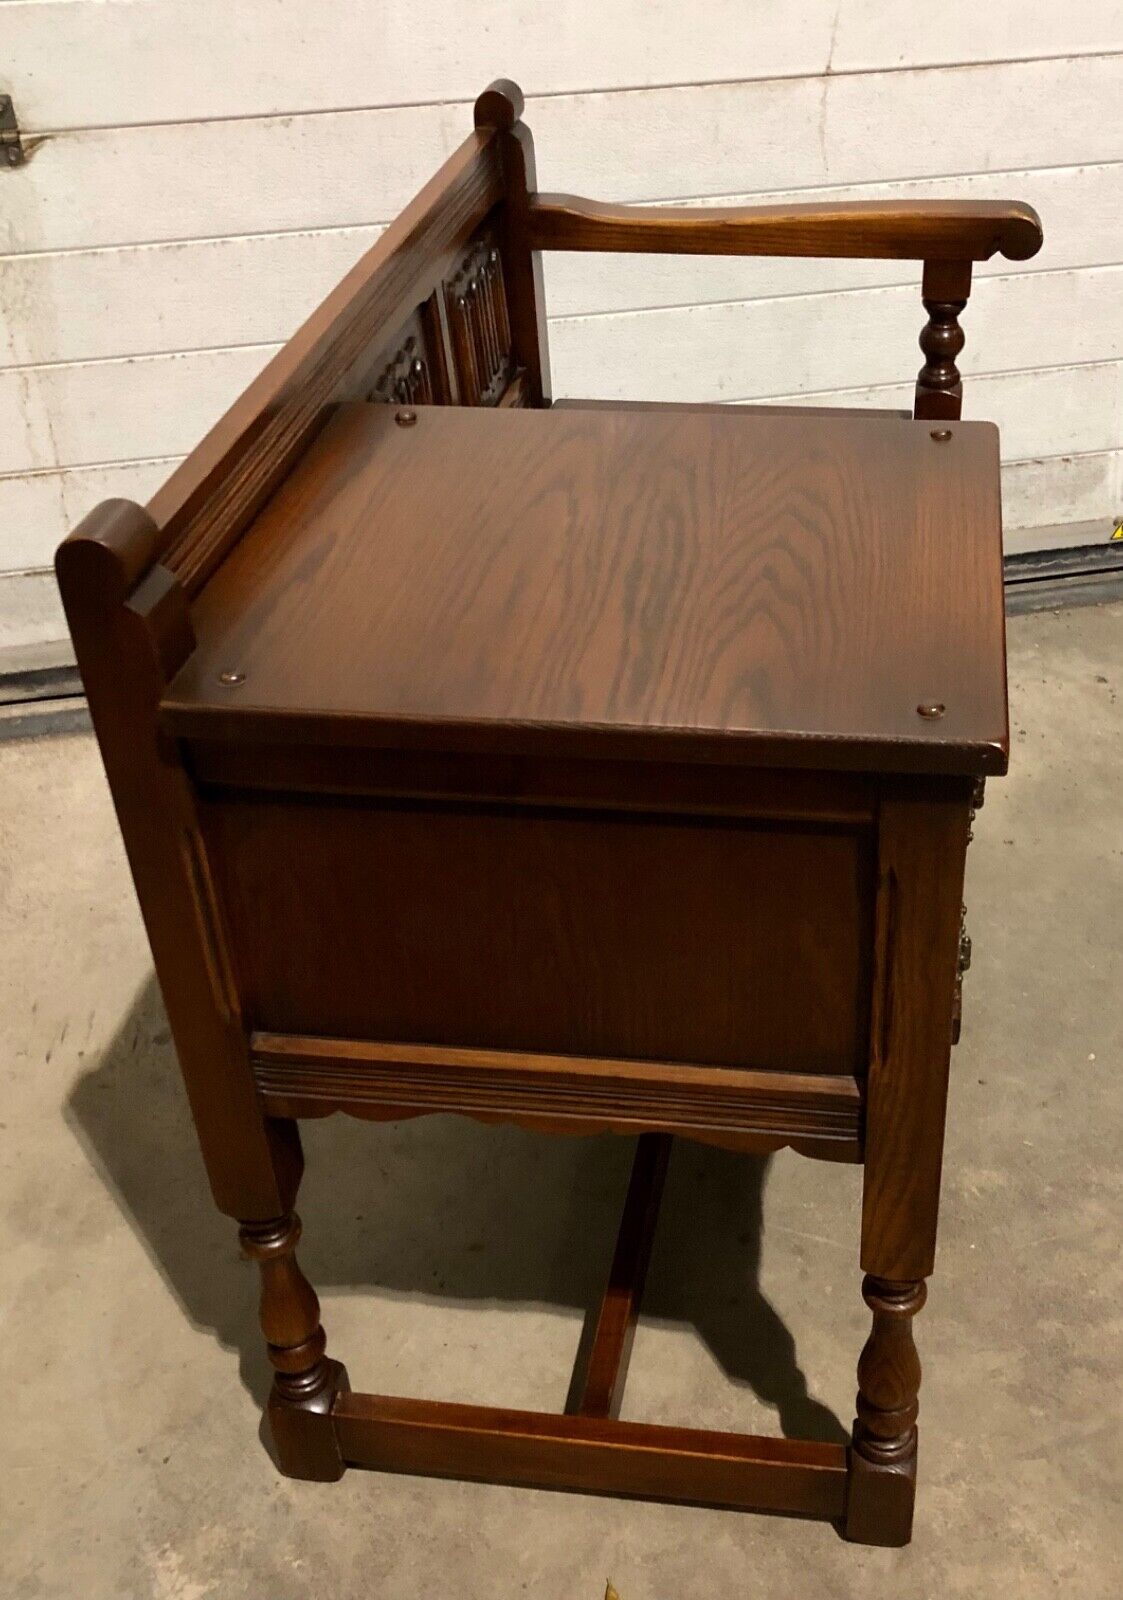 000788....Handsome Carved Oak Hall Seat / Old Charm Telephone Table ( sold )